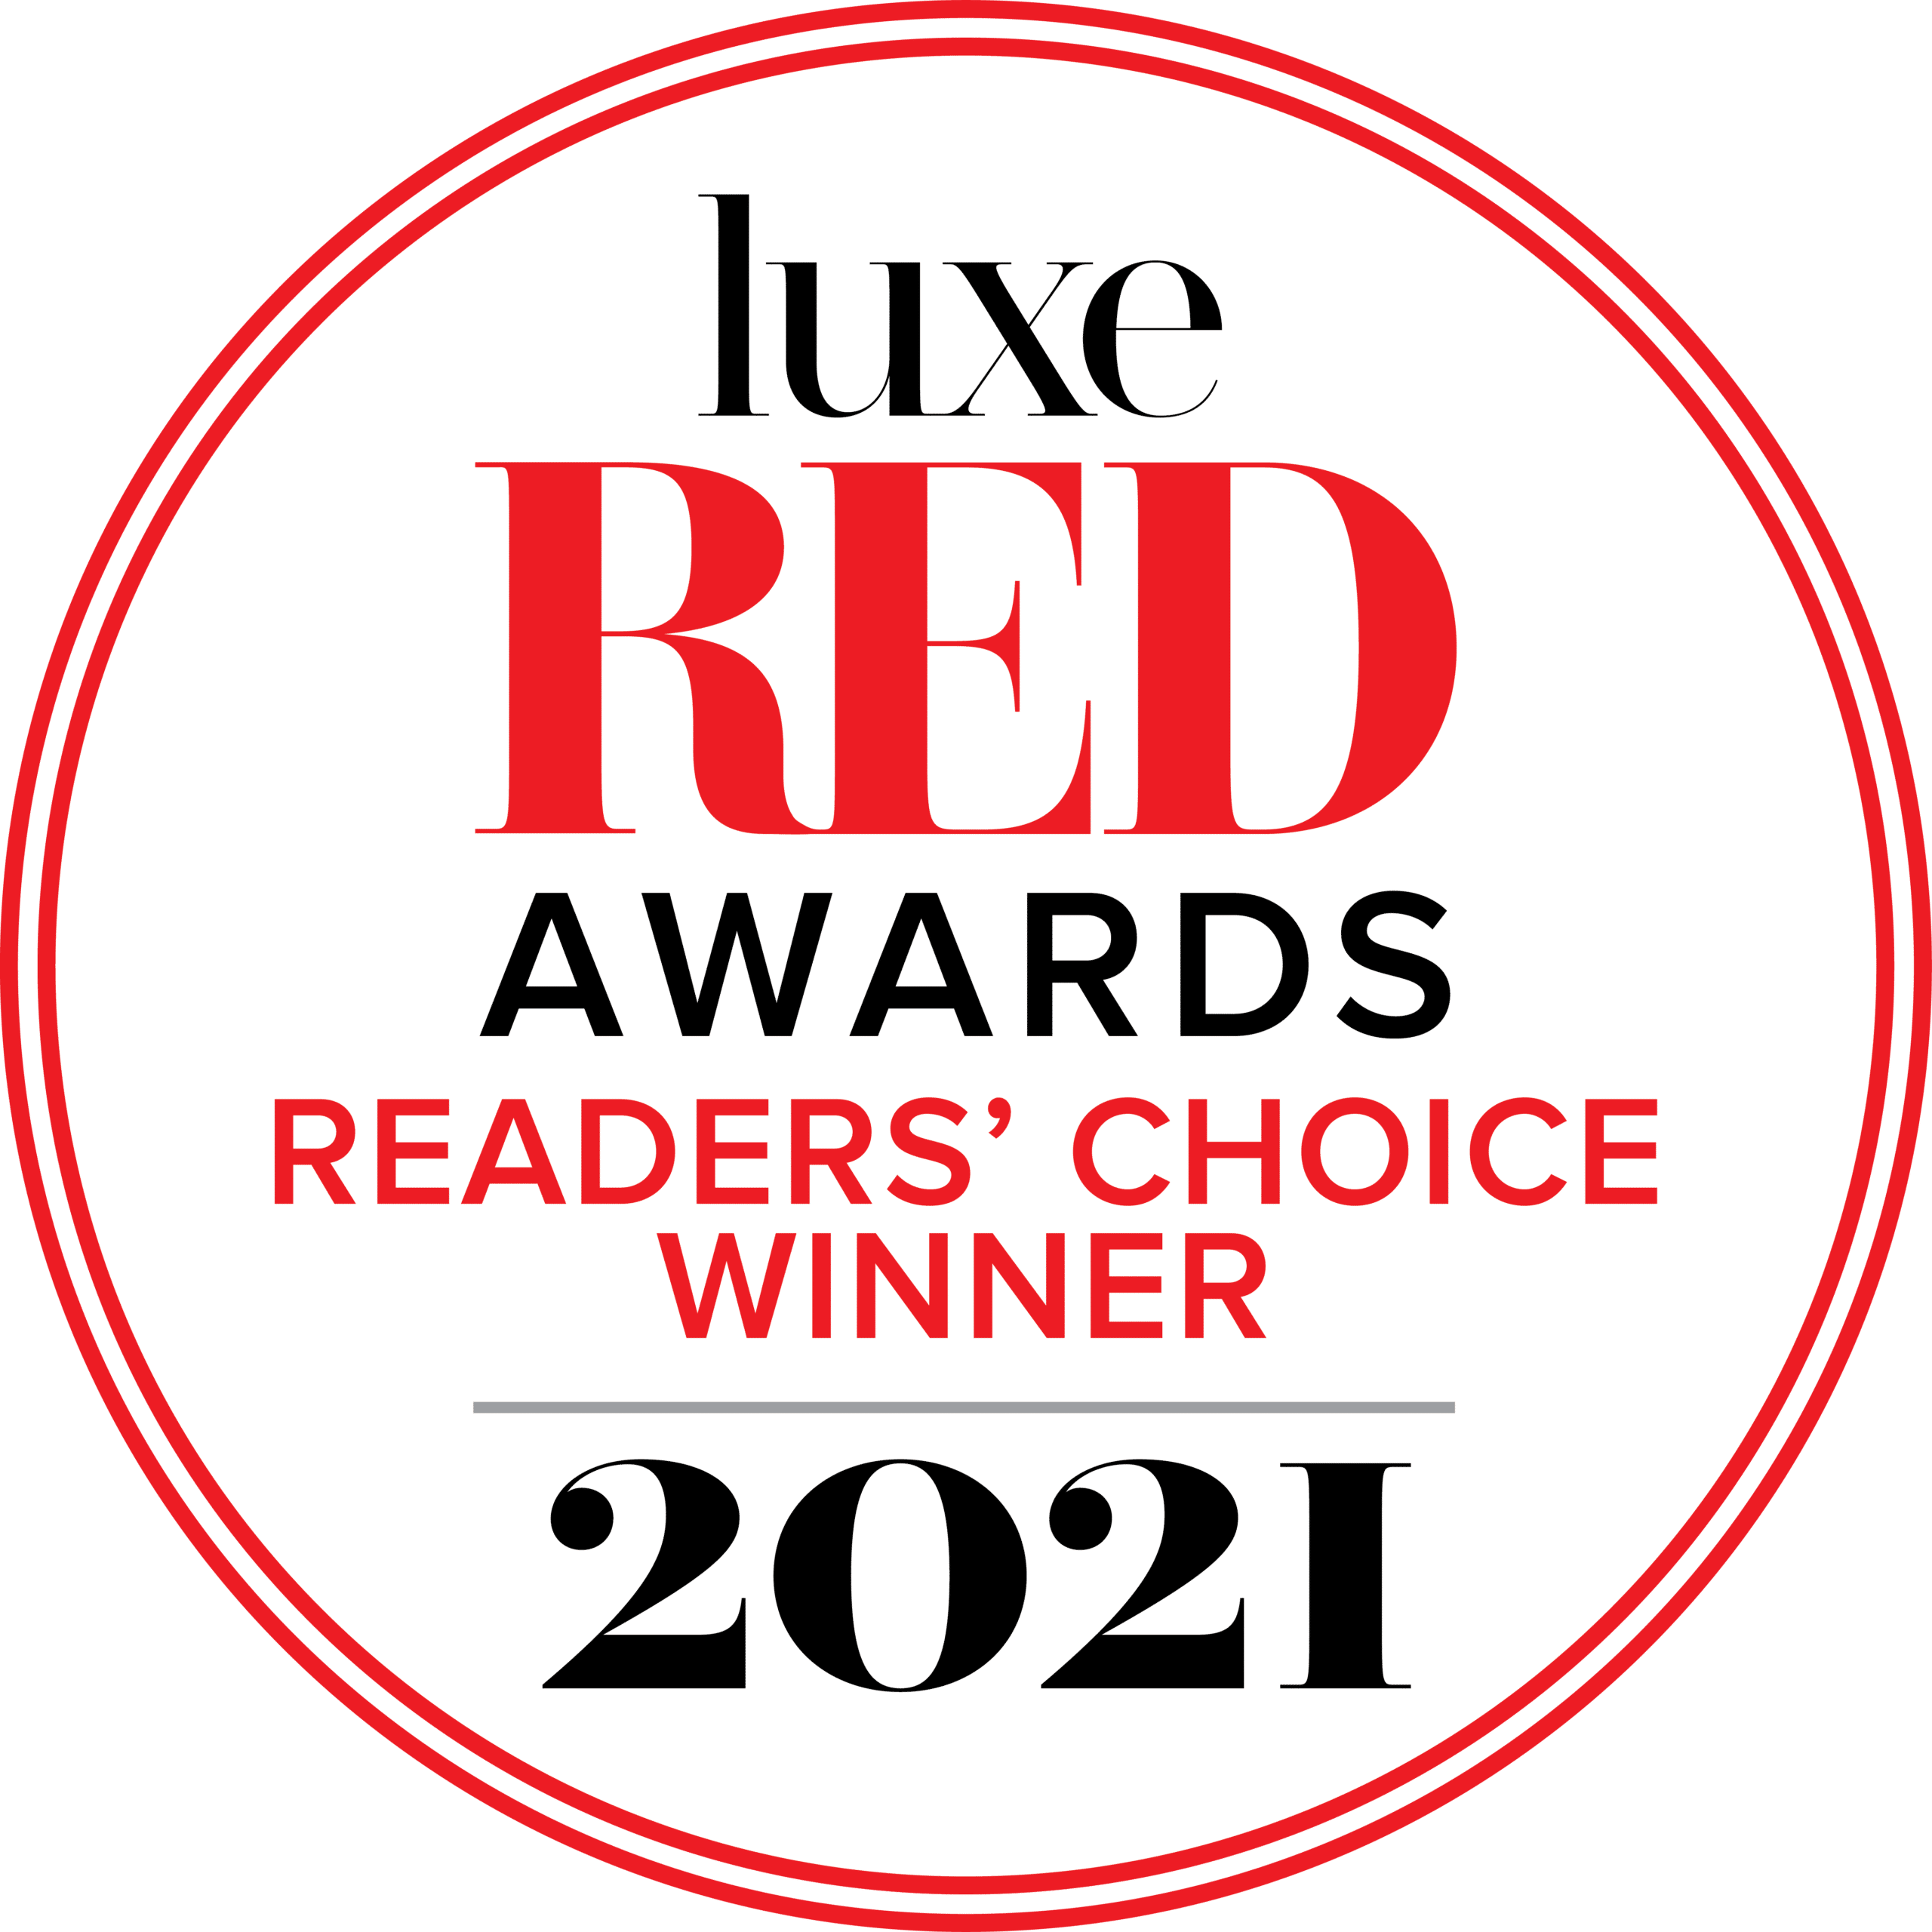 Luxe Red Awards: Readers' Choice Winner 2021